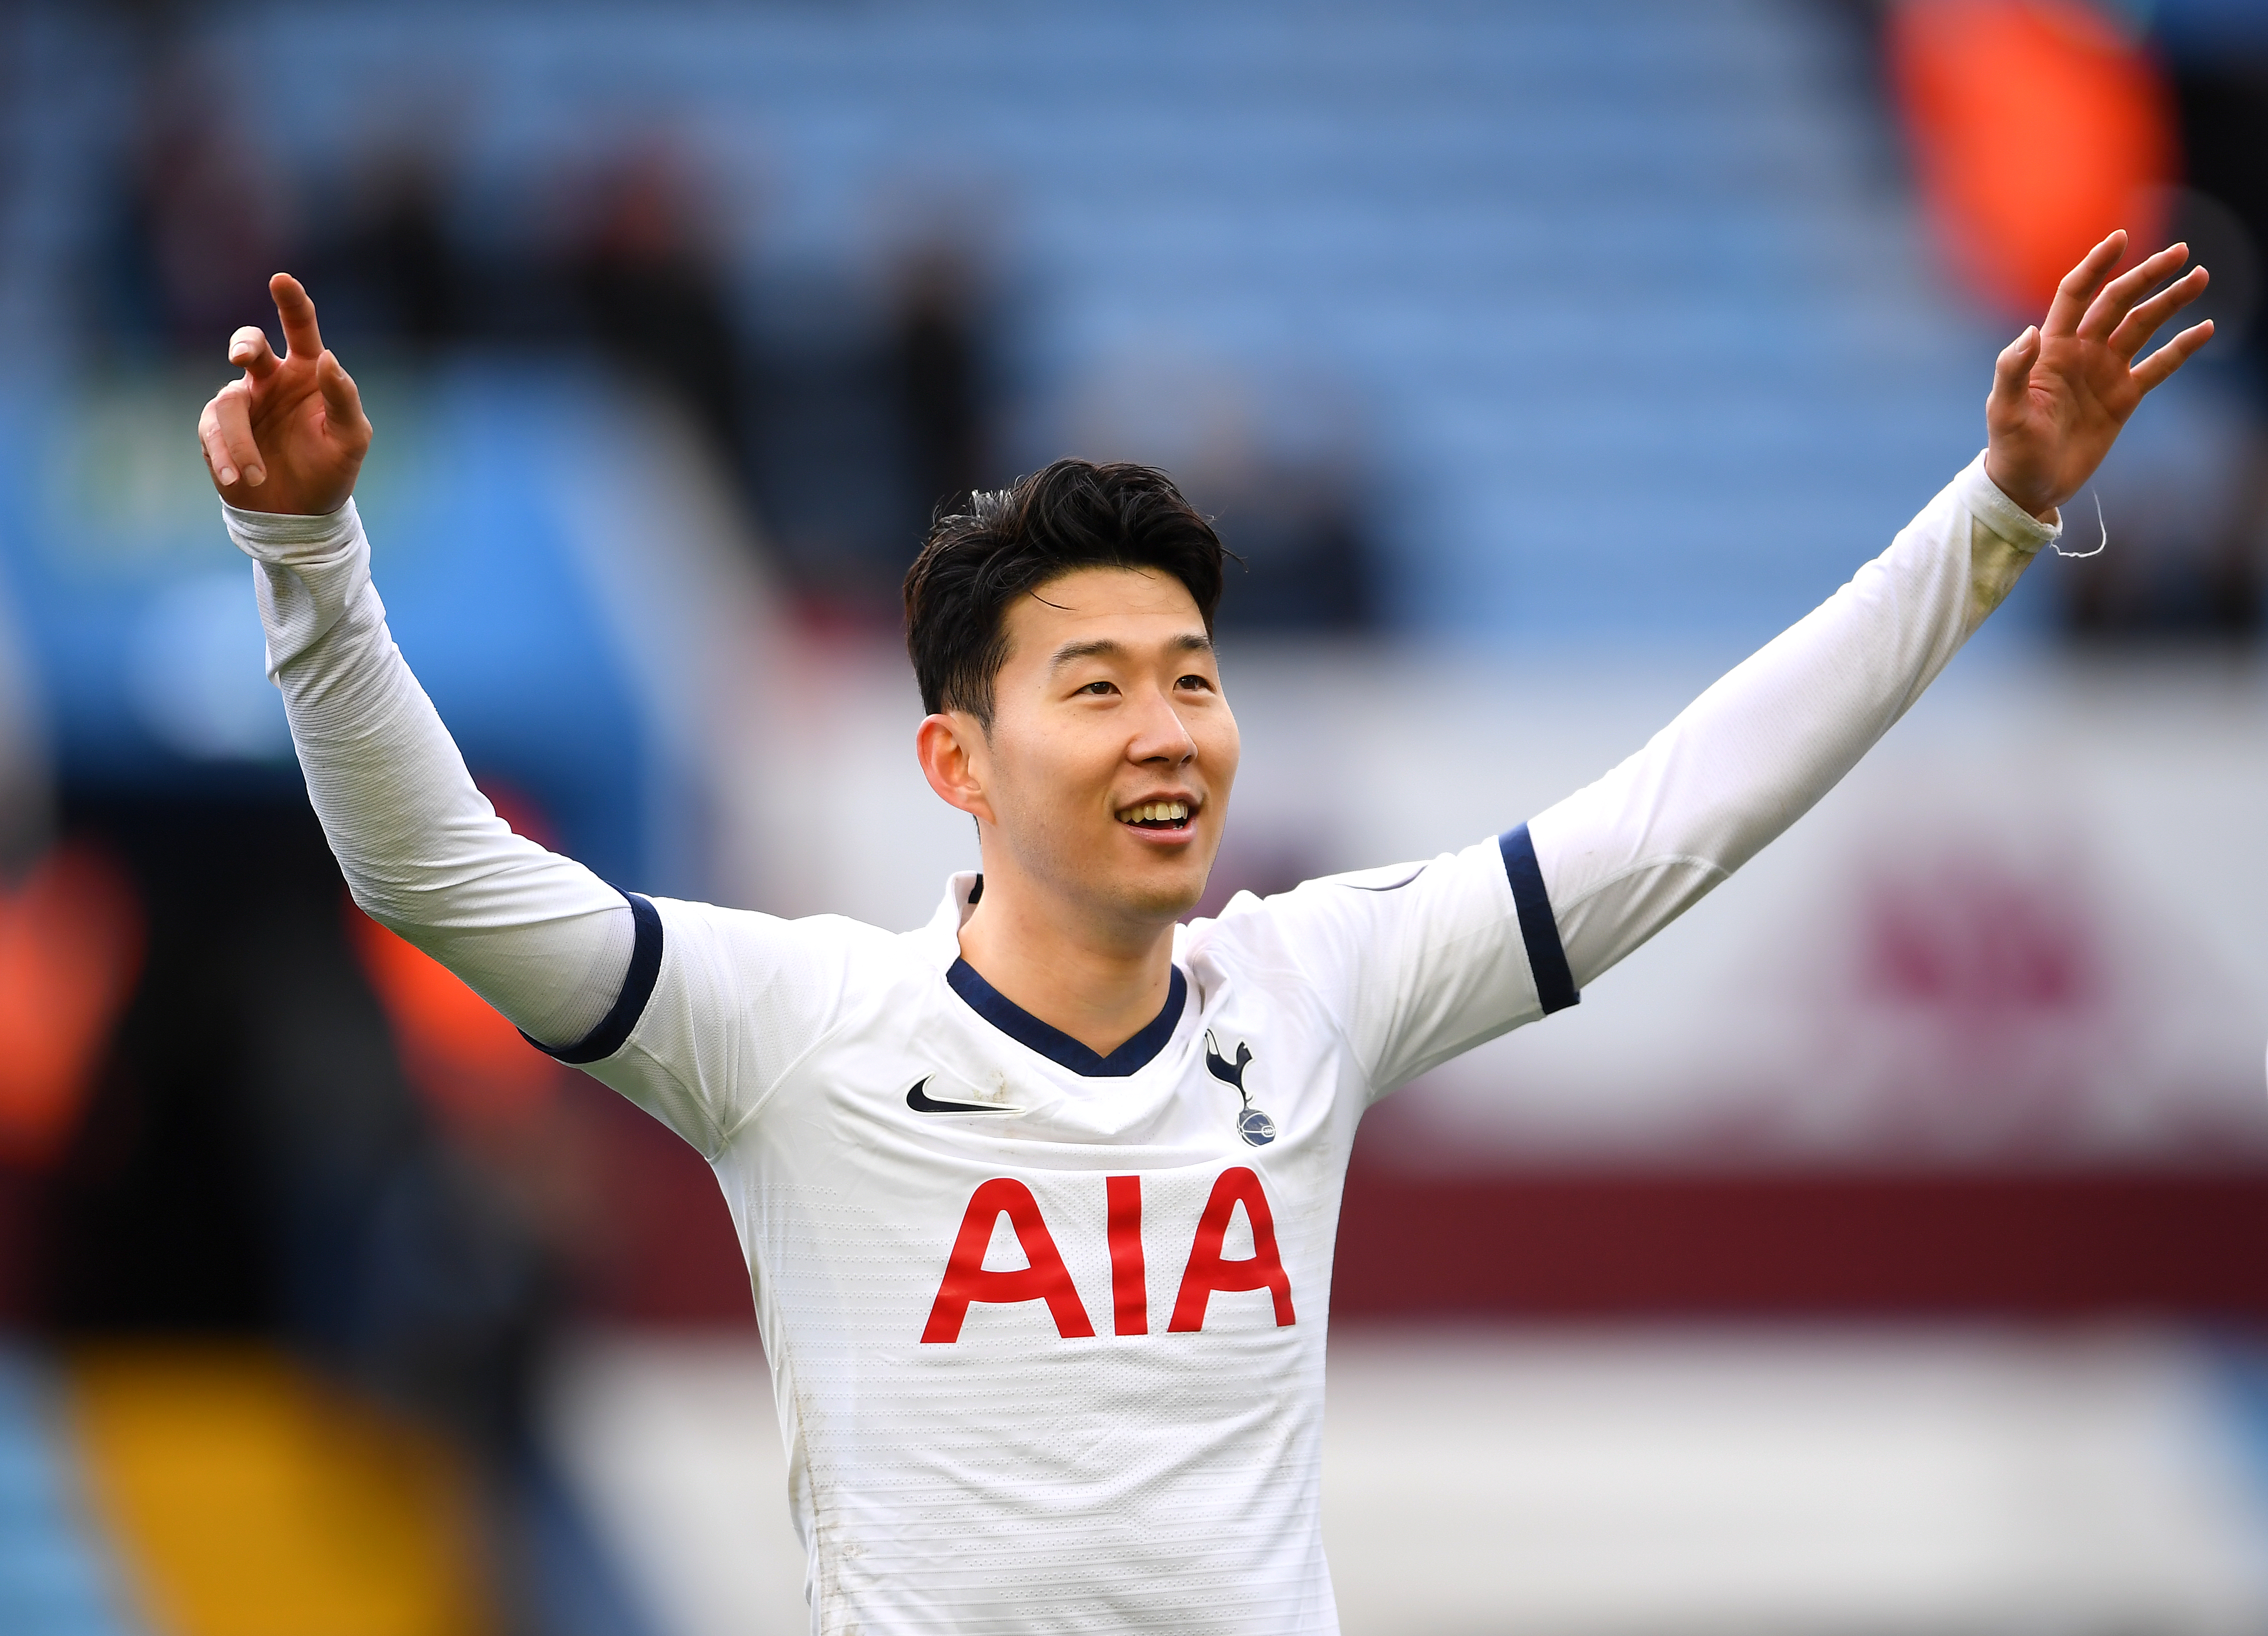 Son Heung-min will have a huge role to play for Tottenham (Photo by Laurence Griffiths/Getty Images)